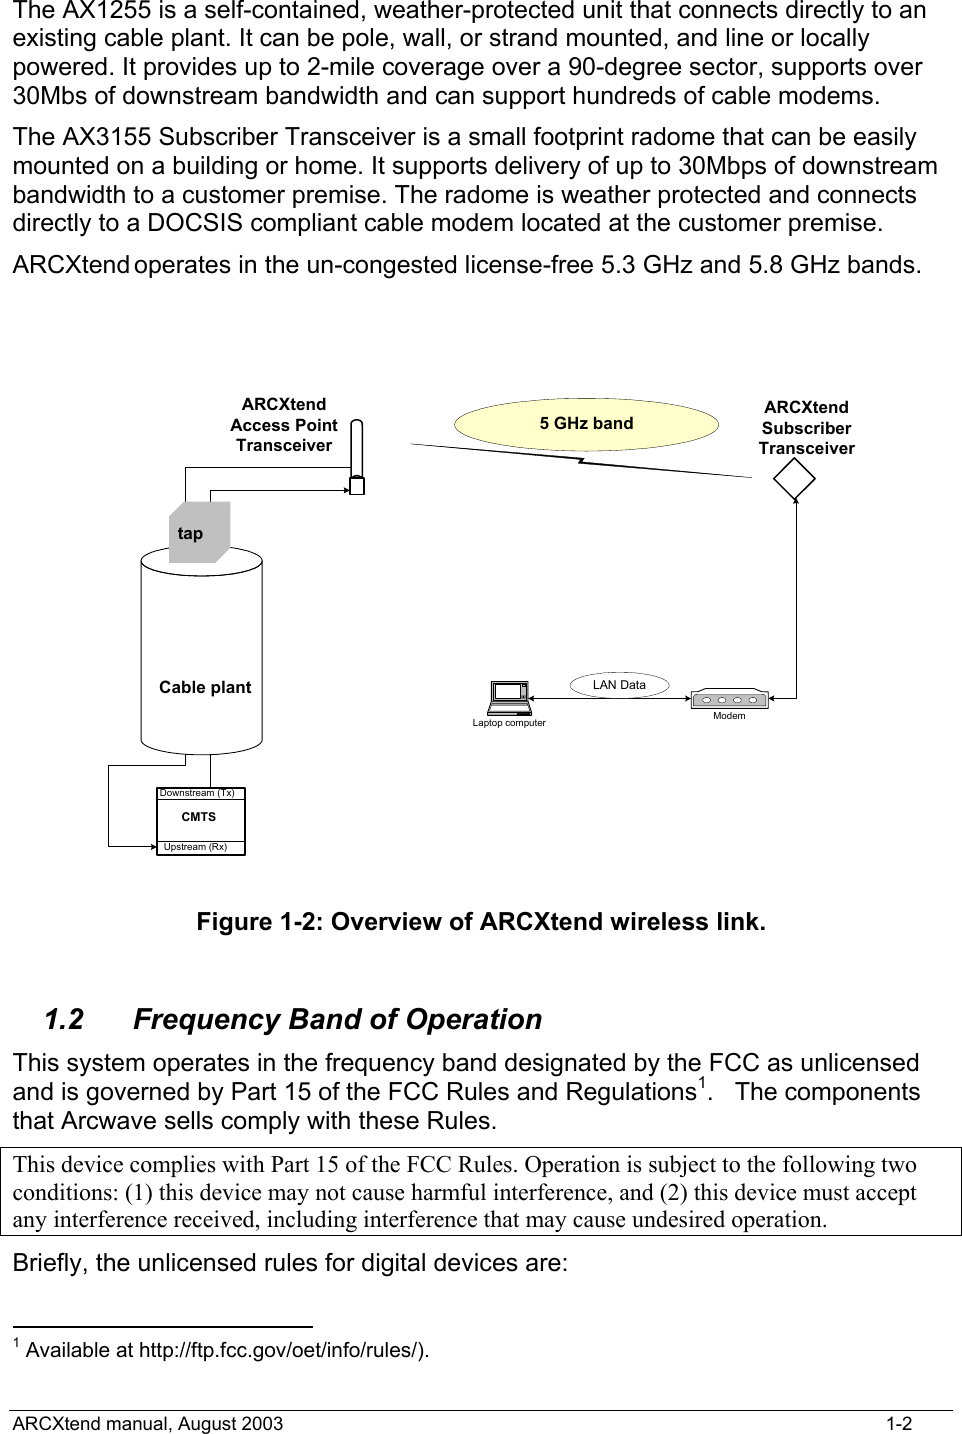  The AX1255 is a self-contained, weather-protected unit that connects directly to an existing cable plant. It can be pole, wall, or strand mounted, and line or locally powered. It provides up to 2-mile coverage over a 90-degree sector, supports over 30Mbs of downstream bandwidth and can support hundreds of cable modems.  The AX3155 Subscriber Transceiver is a small footprint radome that can be easily mounted on a building or home. It supports delivery of up to 30Mbps of downstream bandwidth to a customer premise. The radome is weather protected and connects directly to a DOCSIS compliant cable modem located at the customer premise.  ARCXtend operates in the un-congested license-free 5.3 GHz and 5.8 GHz bands.   ARCXtendSubscriberTransceiver5 GHz bandModemLaptop computerLAN DataARCXtendAccess PointTransceiverUpstream (Rx)Downstream (Tx)CMTSCable planttap Figure 1-2: Overview of ARCXtend wireless link.  1.2  Frequency Band of Operation This system operates in the frequency band designated by the FCC as unlicensed and is governed by Part 15 of the FCC Rules and Regulations1.   The components that Arcwave sells comply with these Rules. This device complies with Part 15 of the FCC Rules. Operation is subject to the following two conditions: (1) this device may not cause harmful interference, and (2) this device must accept any interference received, including interference that may cause undesired operation. Briefly, the unlicensed rules for digital devices are:                                             1 Available at http://ftp.fcc.gov/oet/info/rules/).   ARCXtend manual, August 2003    1-2 